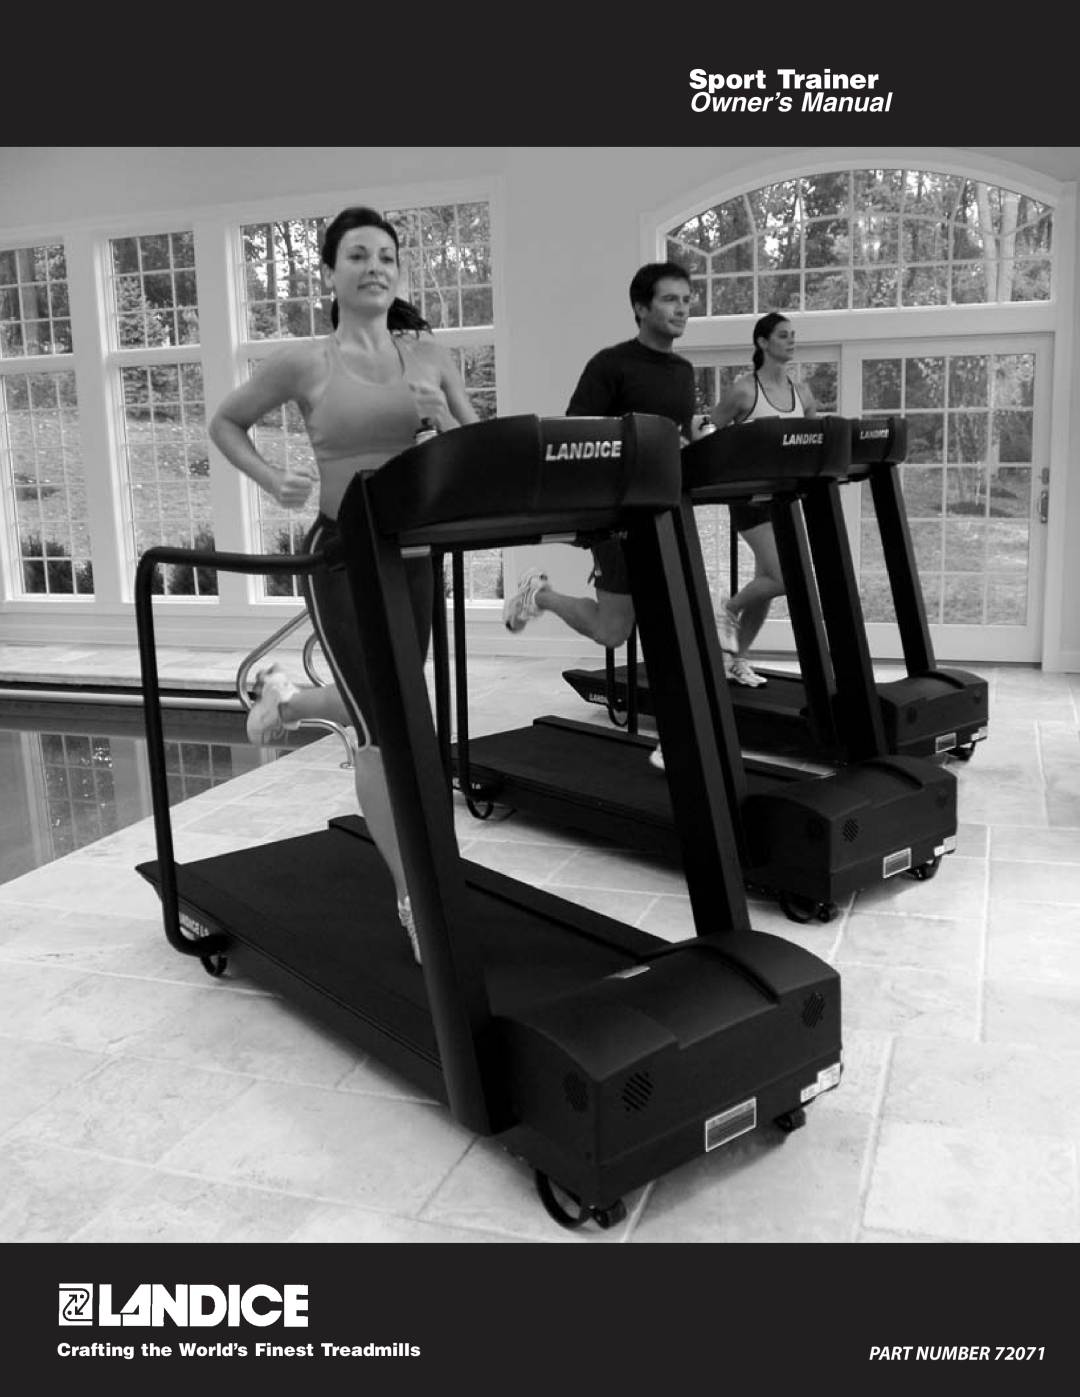 Landice manual Sport Trainer, Owner’s Manual, Crafting the World’s Finest Treadmills, Part Number 